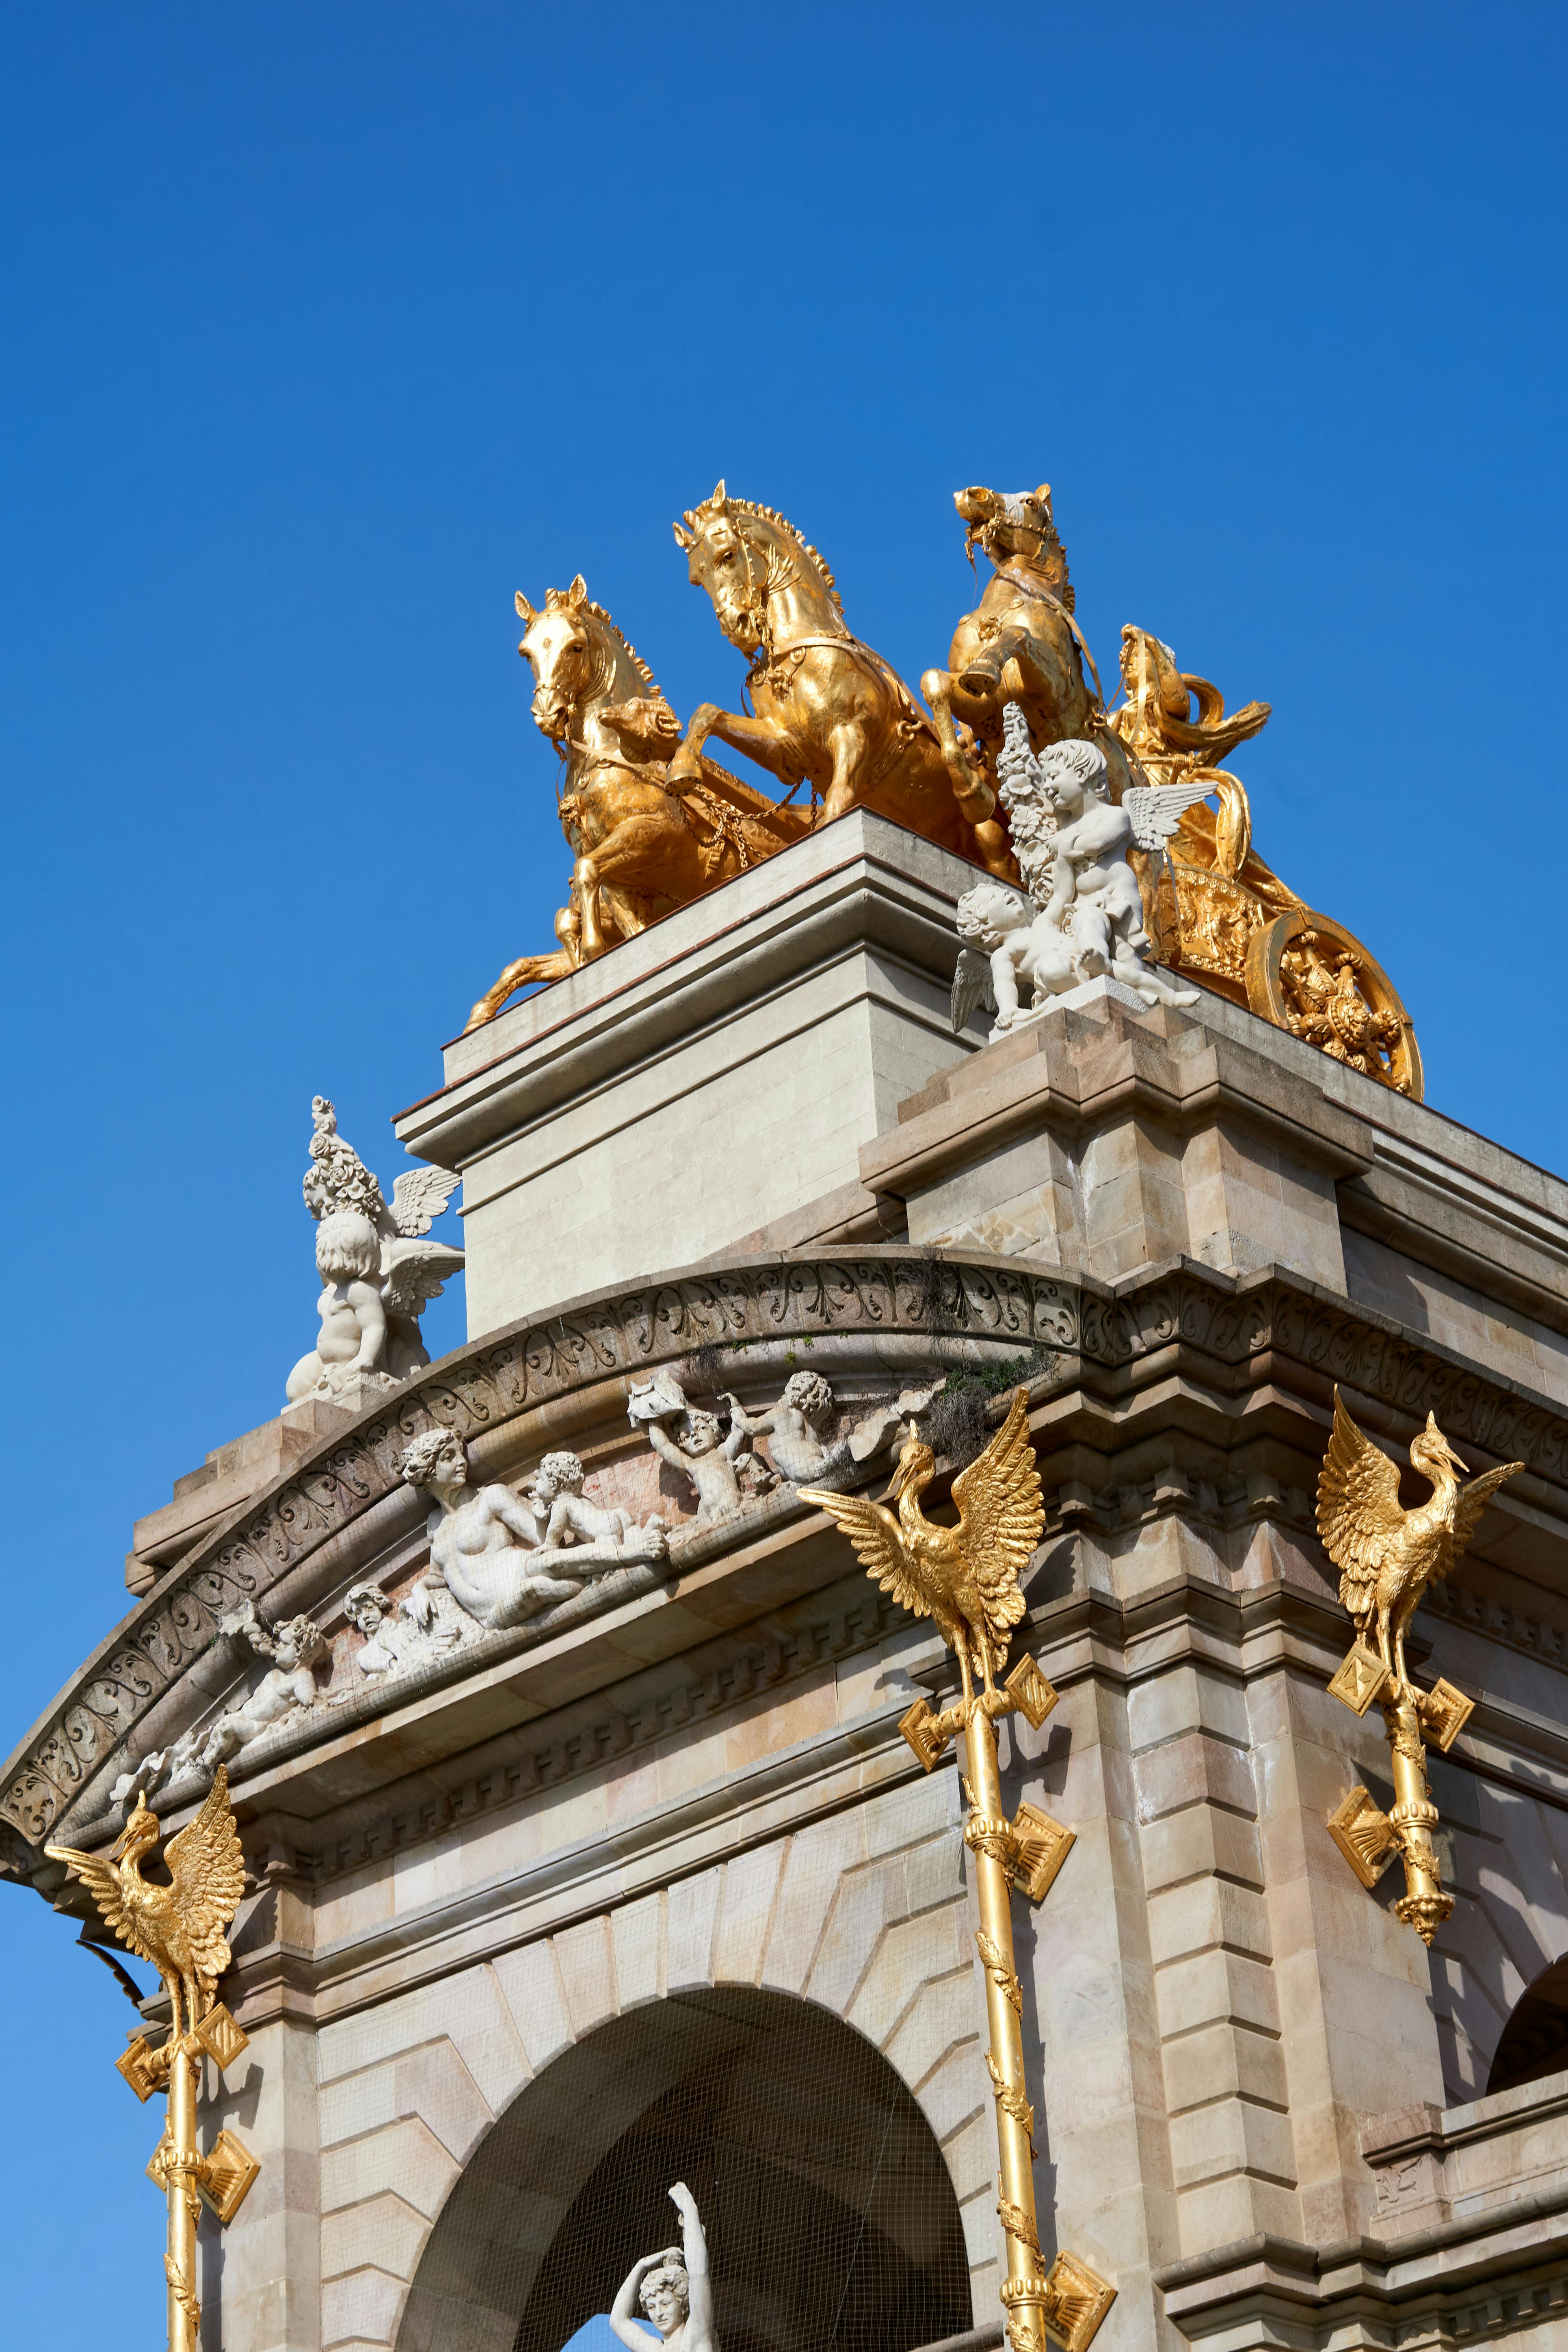 golden horse statues on top of a building